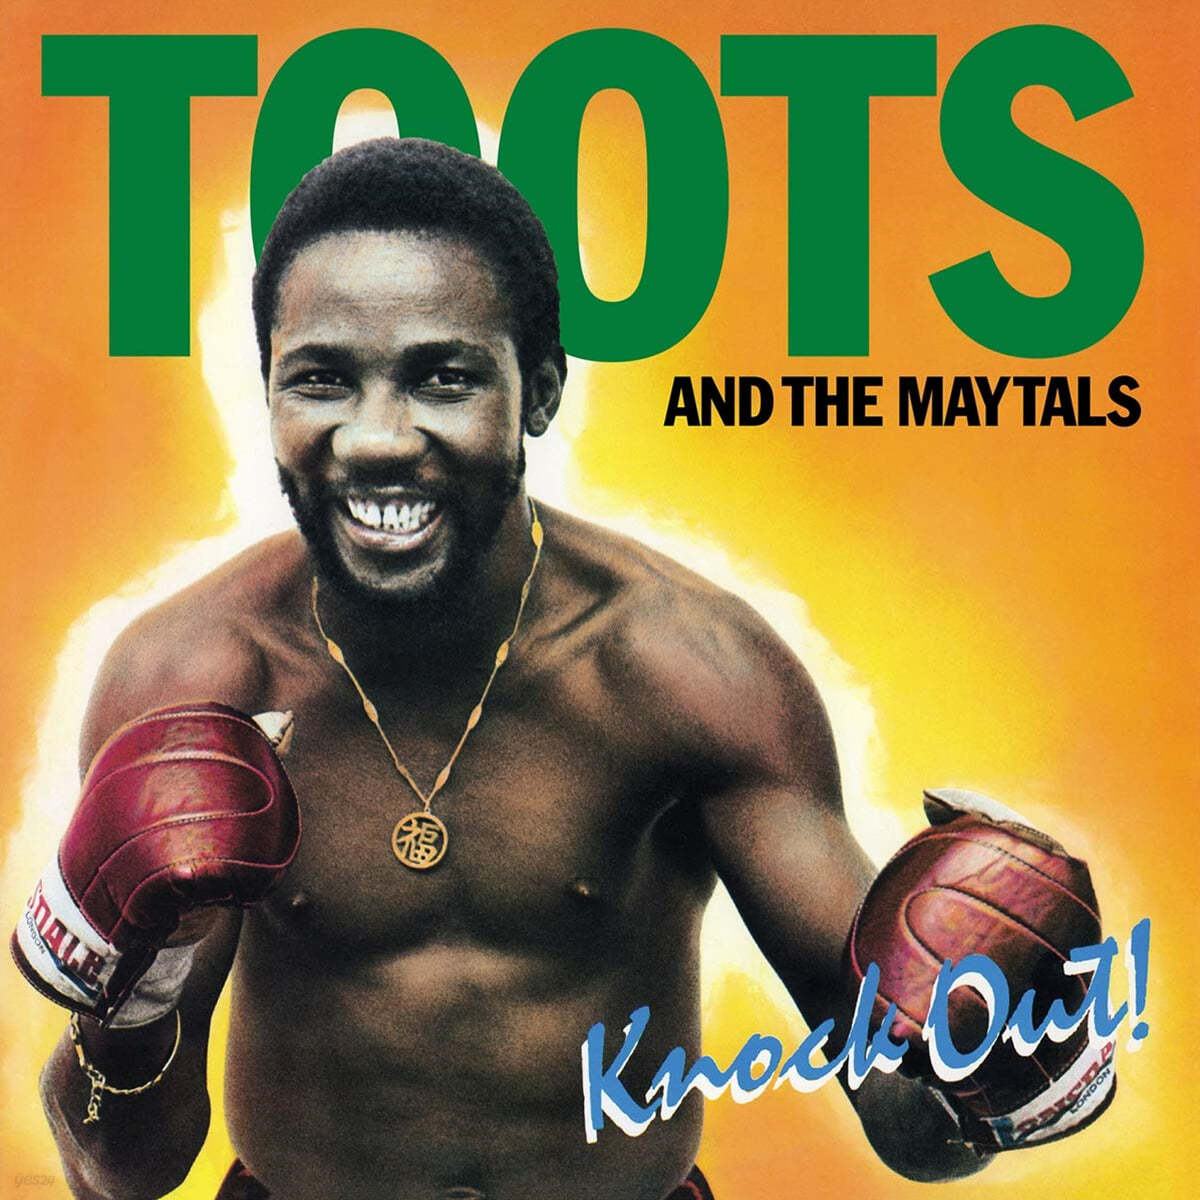 Toots &amp; The Maytals (투츠 앤드 더 메이털스) - Knock Out! [LP] 